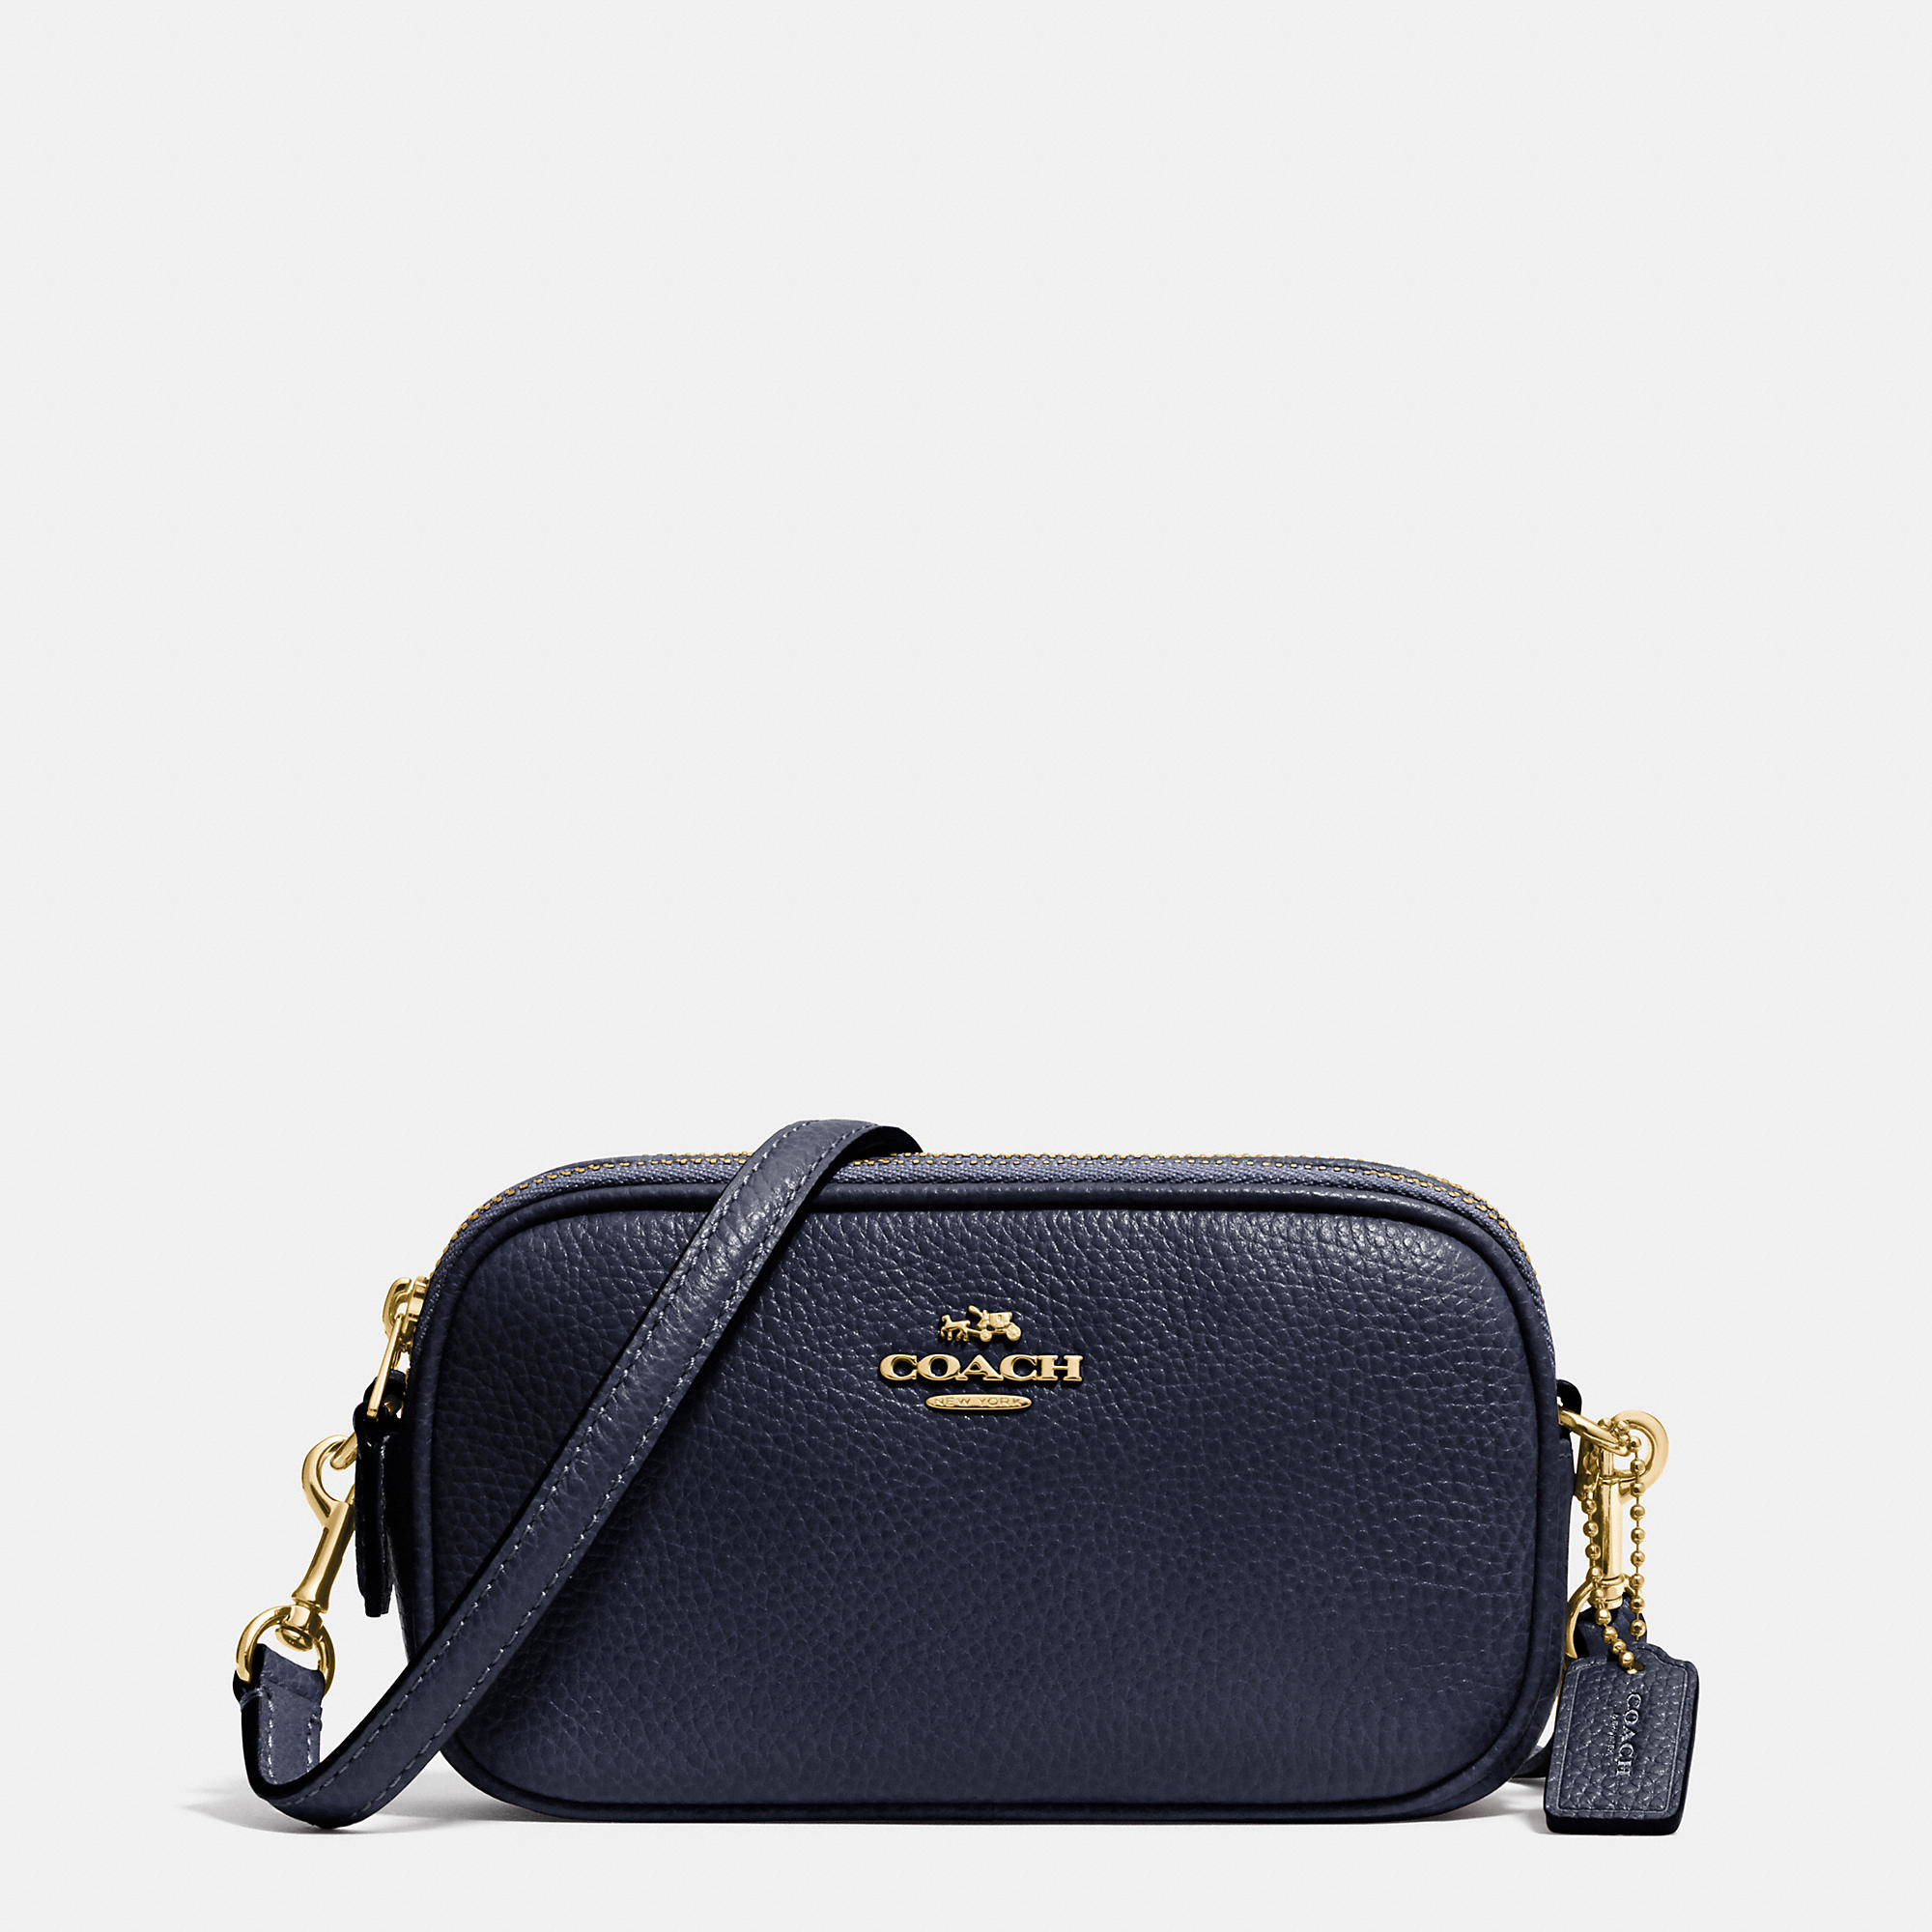 Lyst - Coach Crossbody Pouch In Pebble Leather in Blue